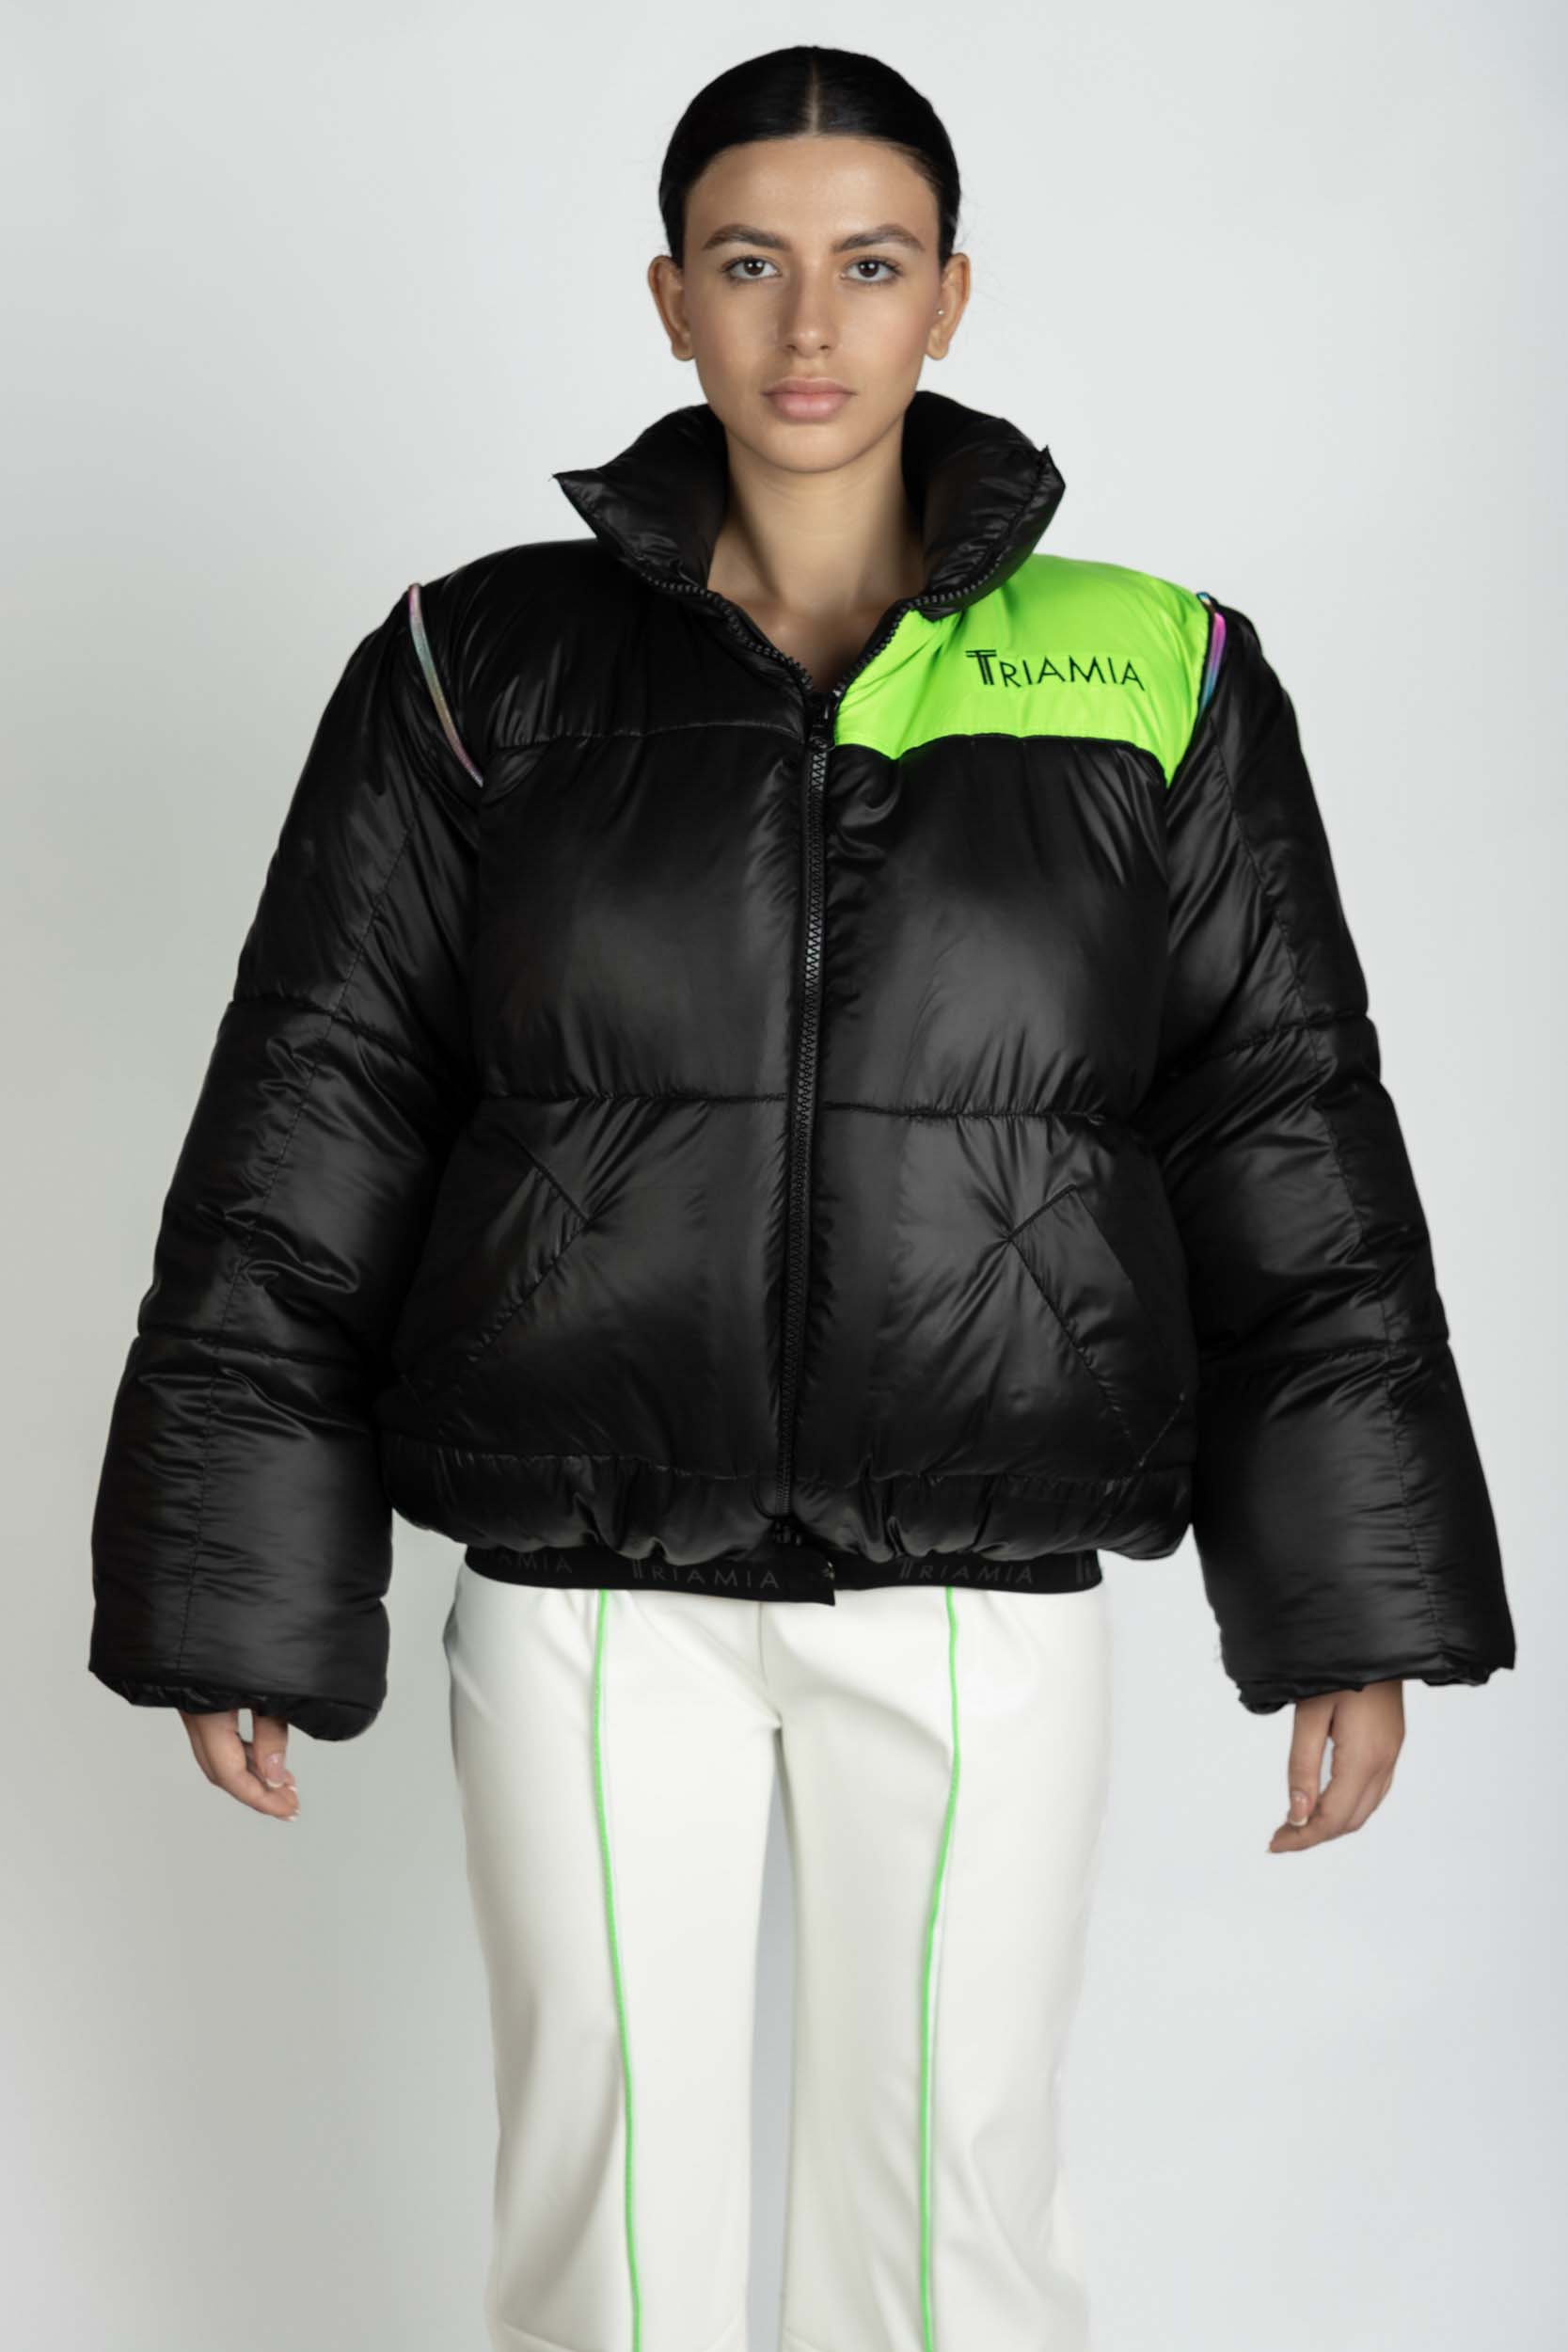 Oversized black and neon green puffer jacket with zipper and Triamia logo on one side. It also has detachable sleeves in order to transform it in a vest.